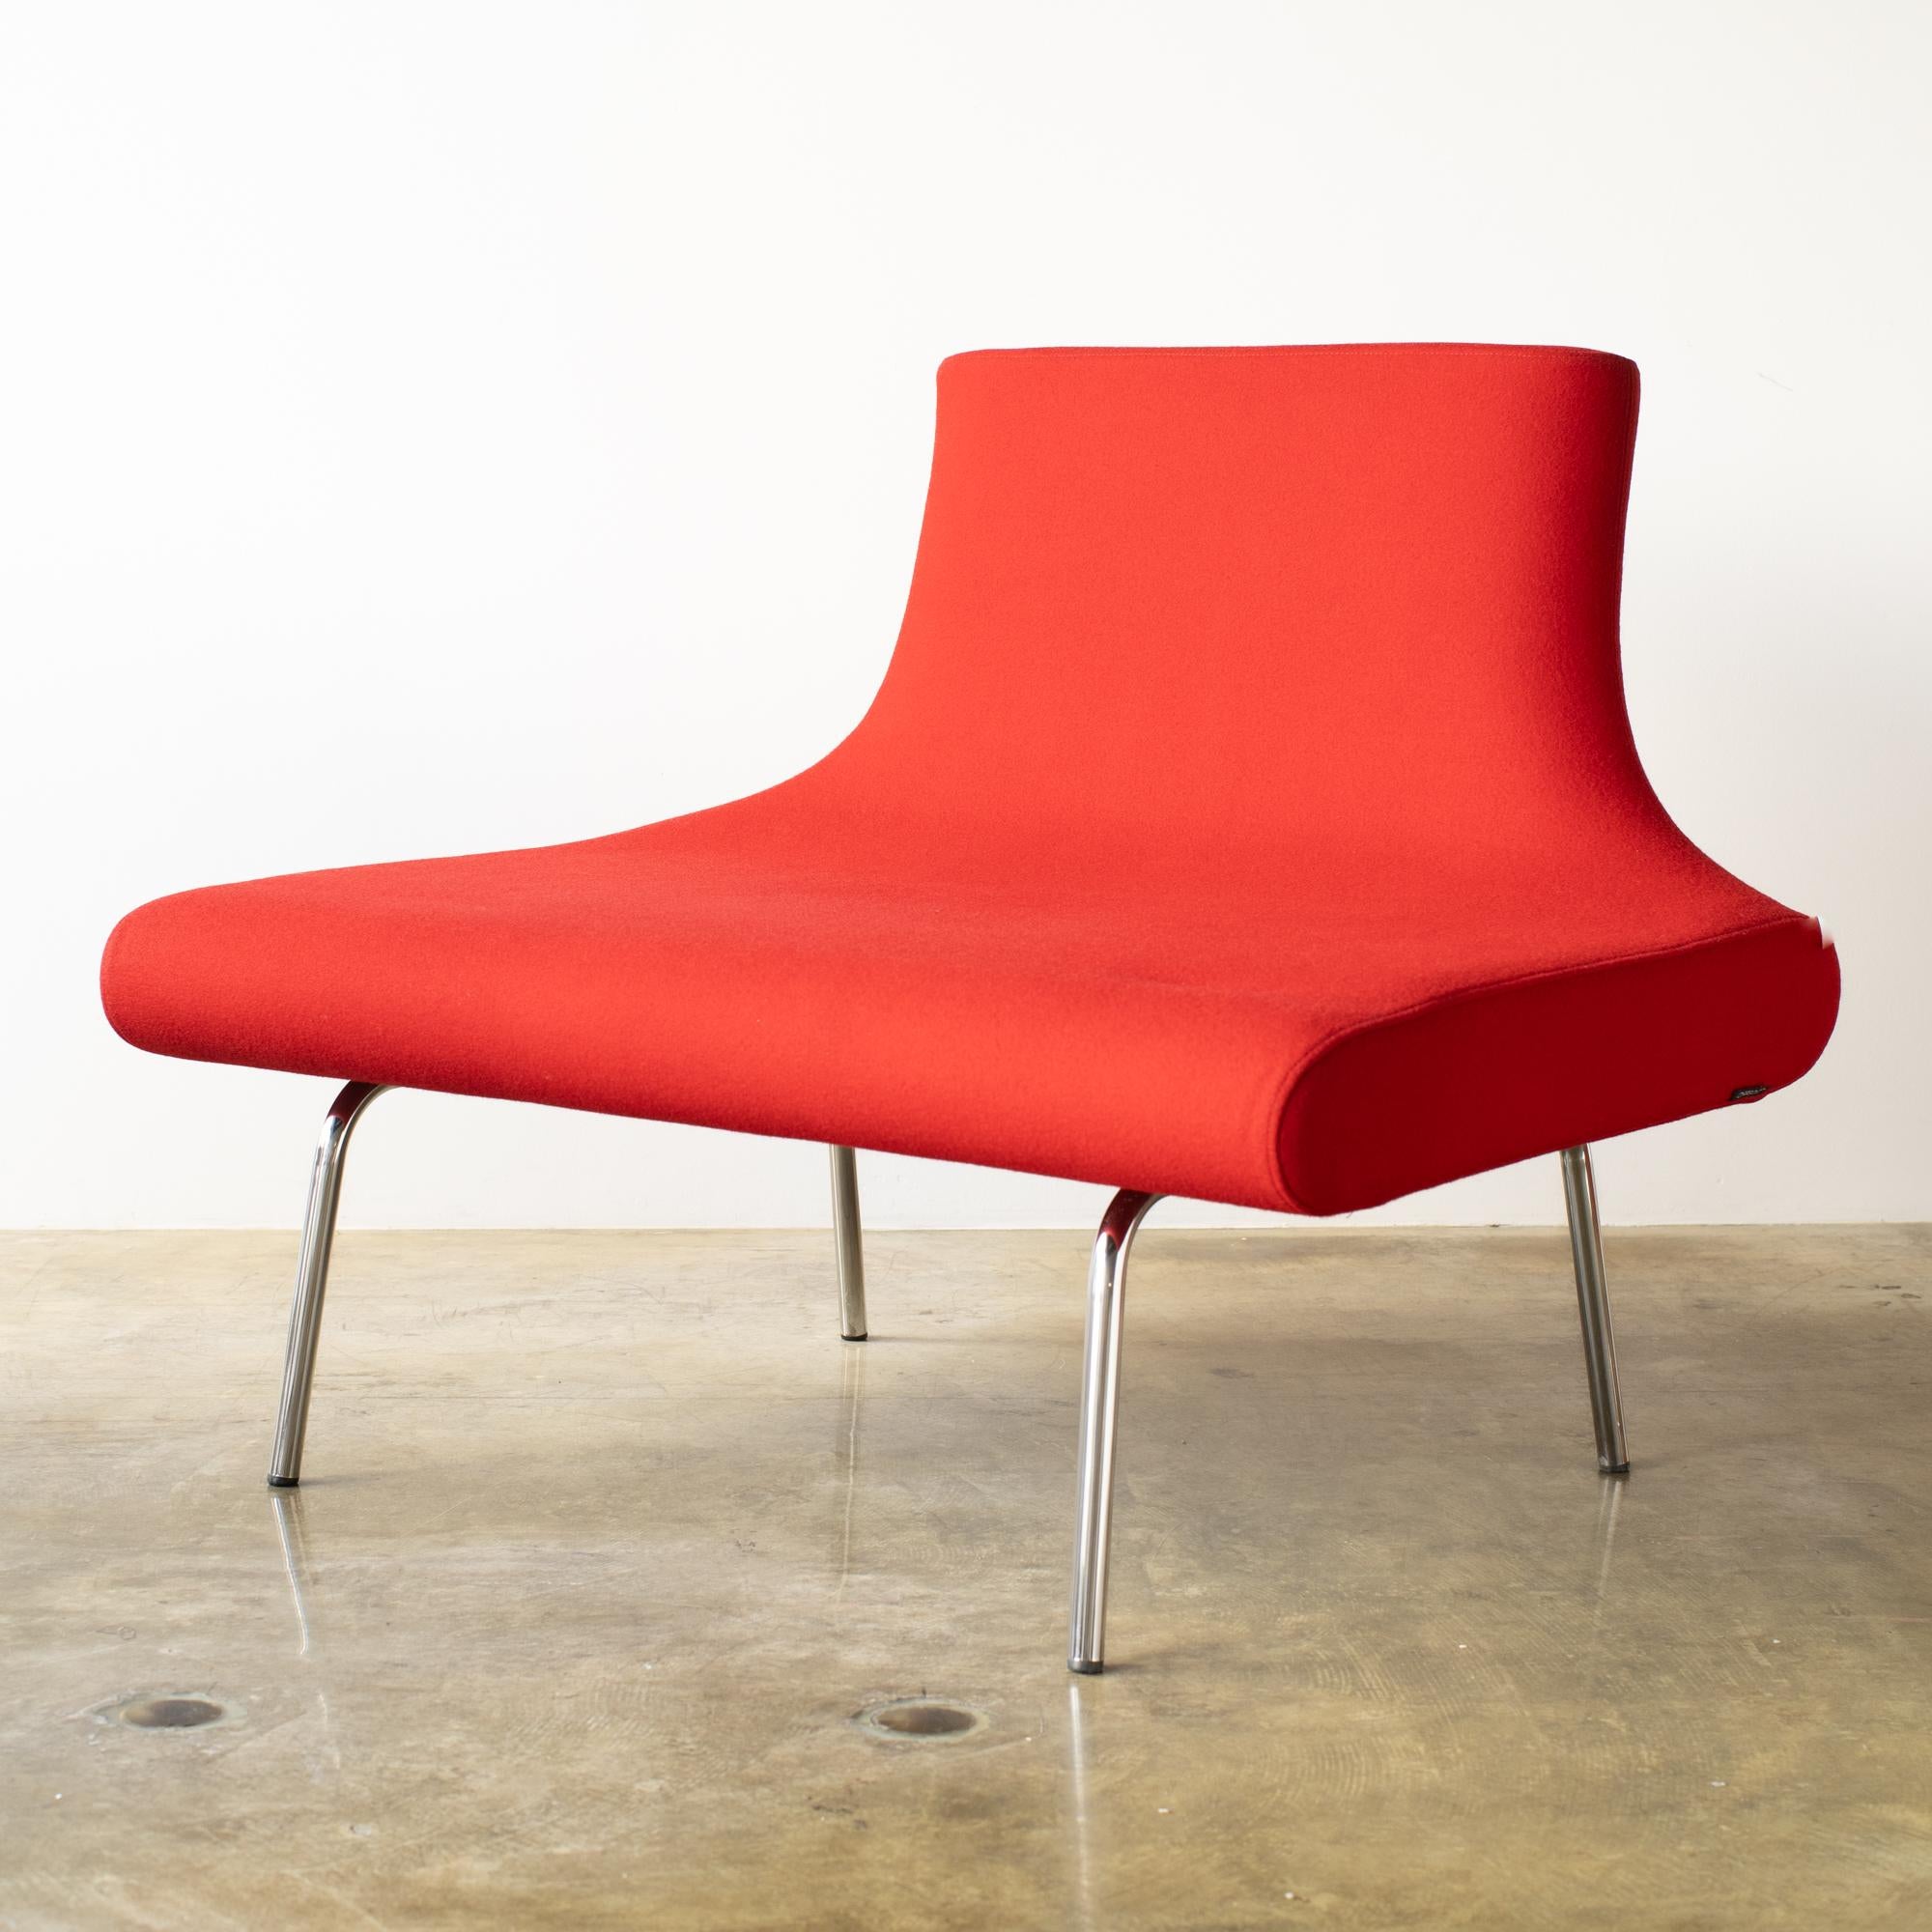 Space Age Chair red fabric Orbit sofa Eero Koivisto  Y2K style design space age For Sale